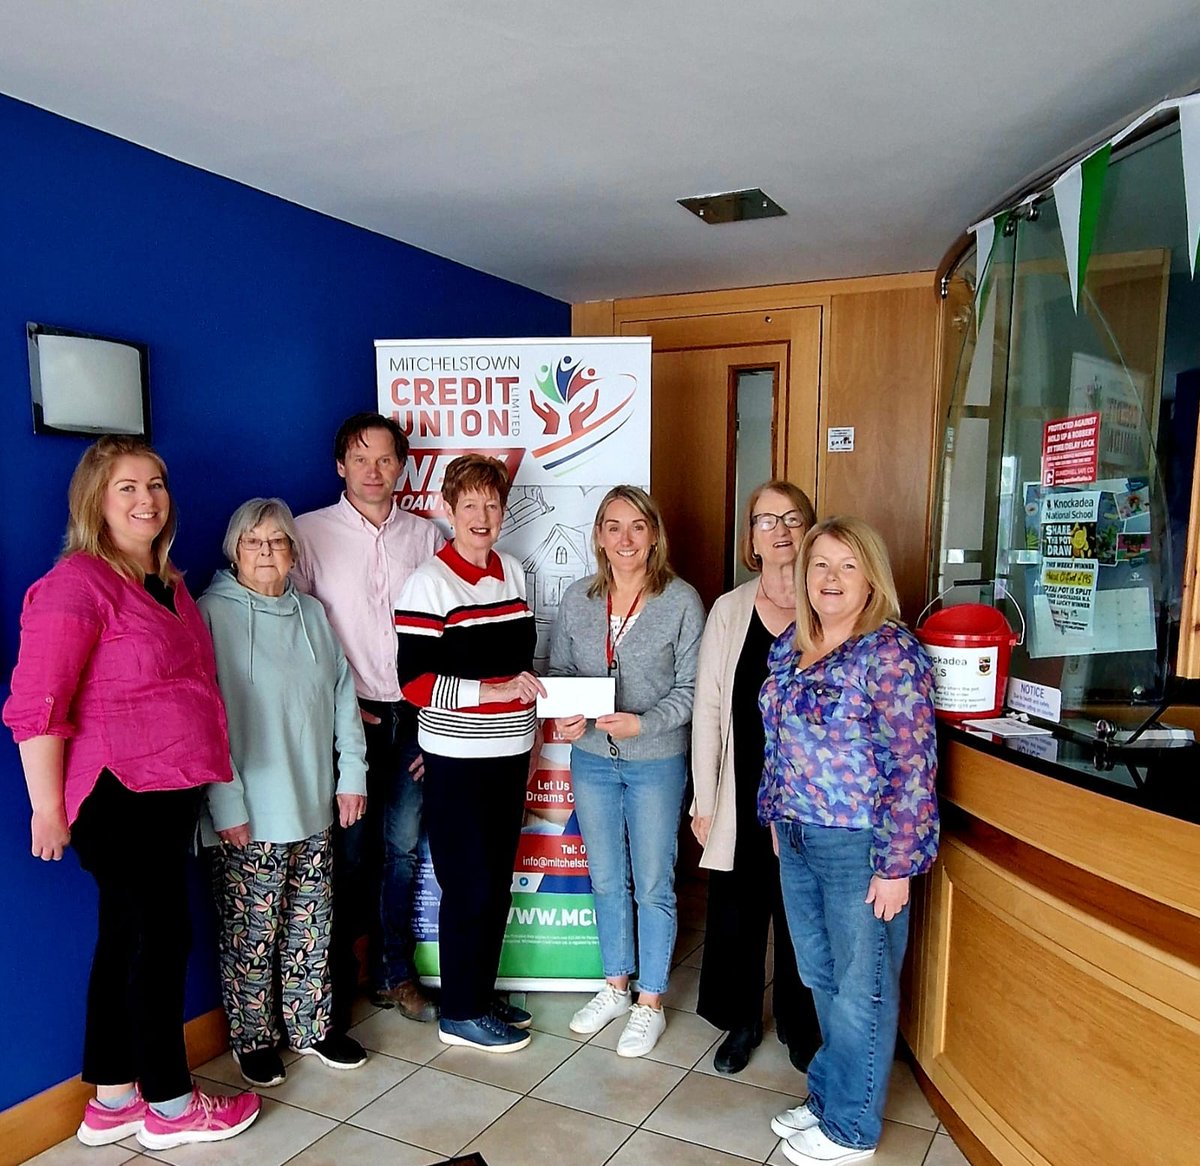 Mitchelstown Credit Union are delighted to support the refurbishment of the Glenroe Community Hall! Pictured here is Marie from MCU presenting the Glenroe/Ballyorgan Community Council with a sponsorship cheque!